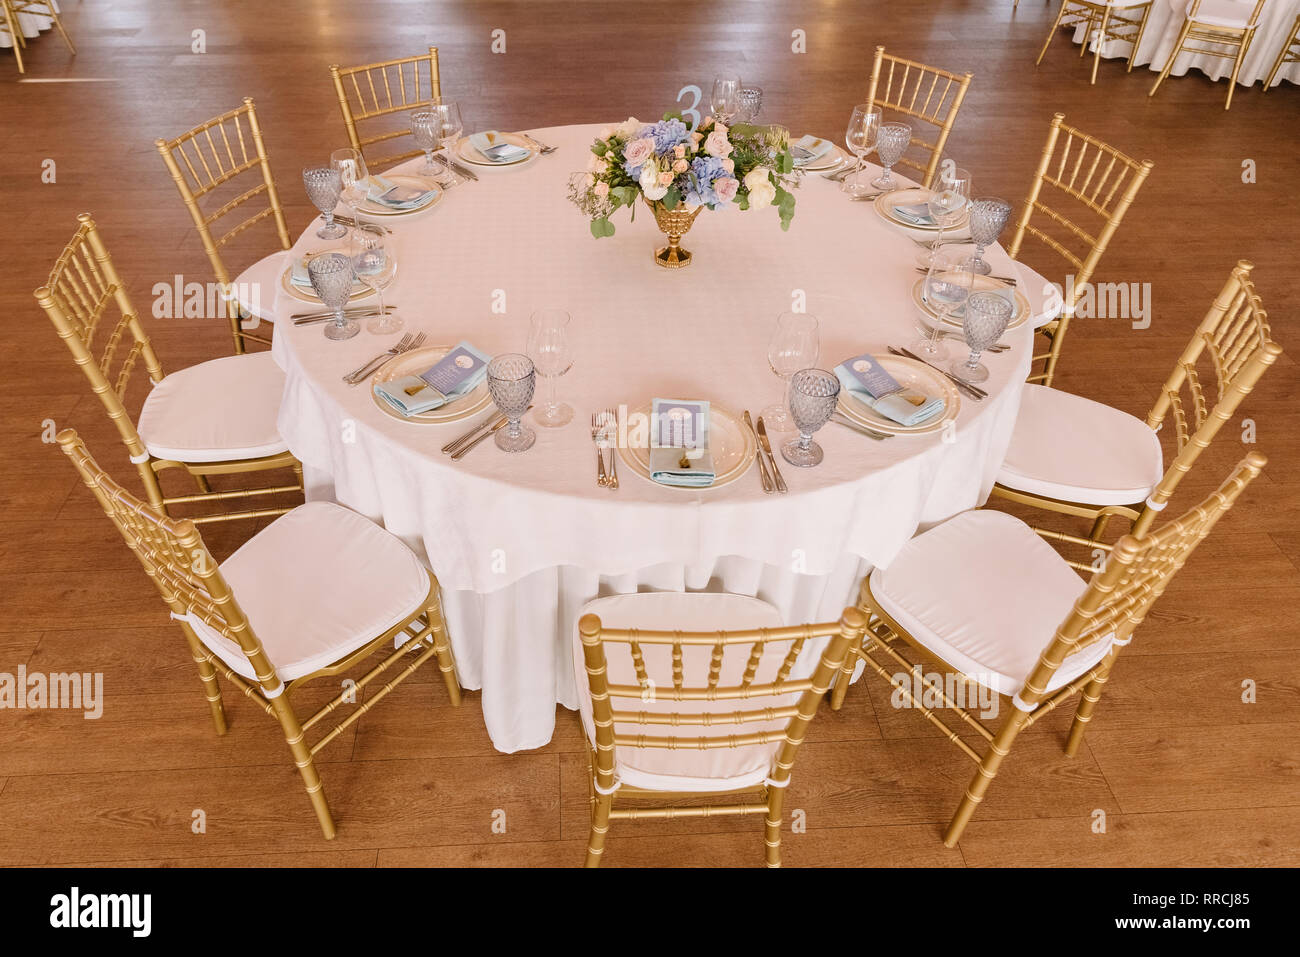 Festive Lunch At Restaurant A Wedding Table For Guests Round Banquet Table Stock Photo Alamy